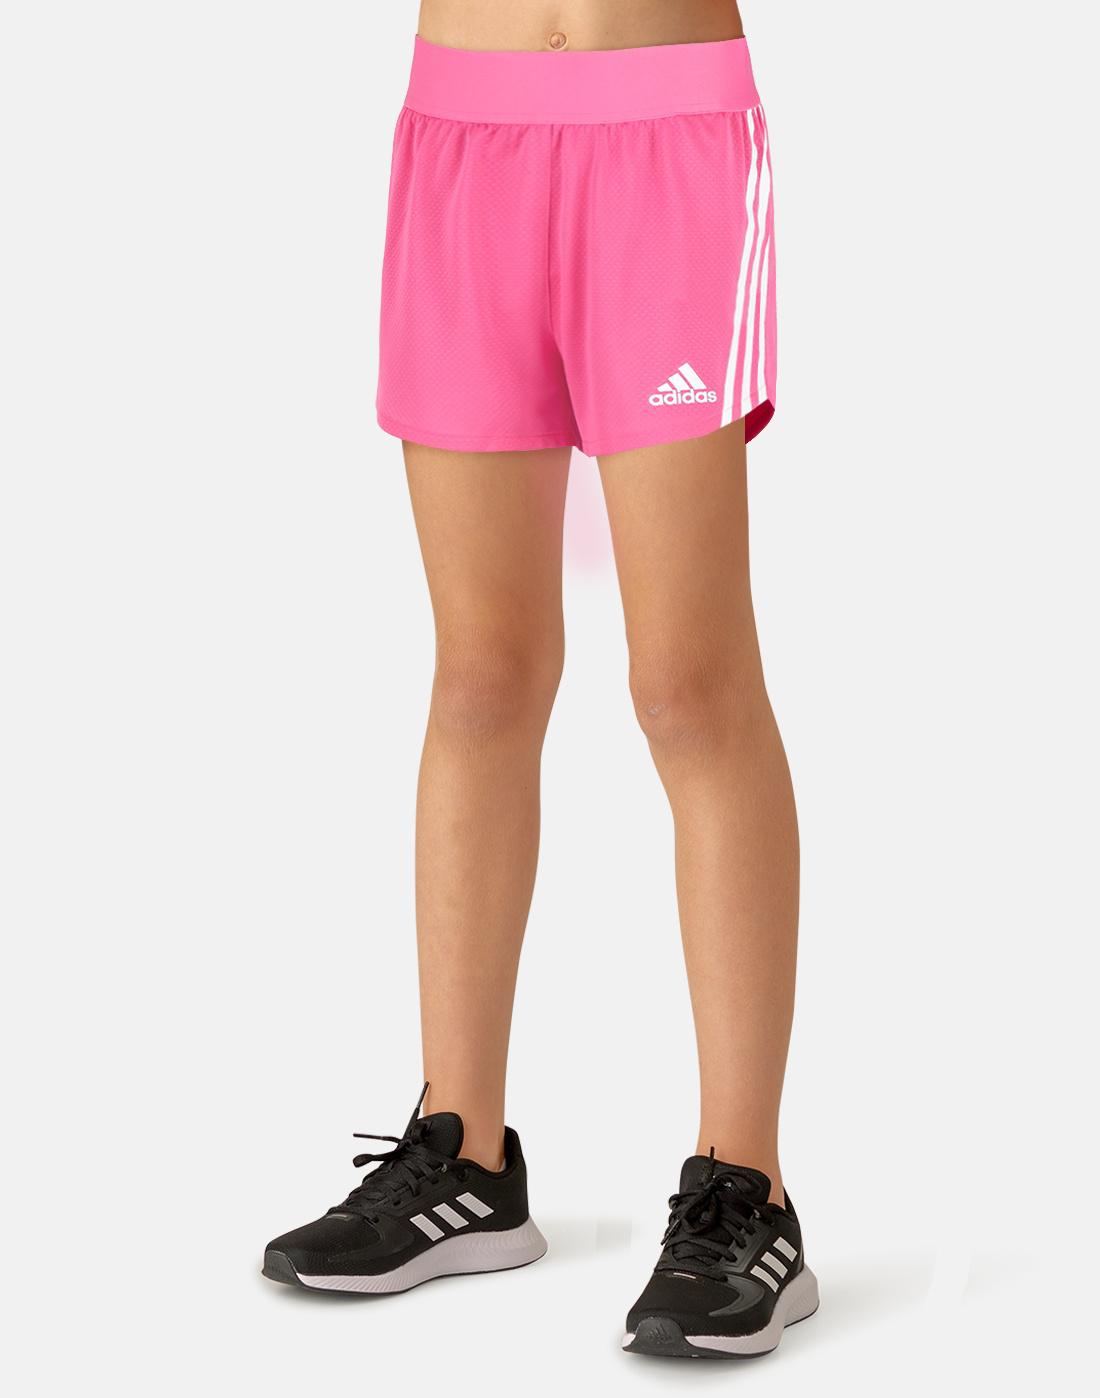 adidas Older 3 Stripe Shorts Pink | Life Style Sports IE